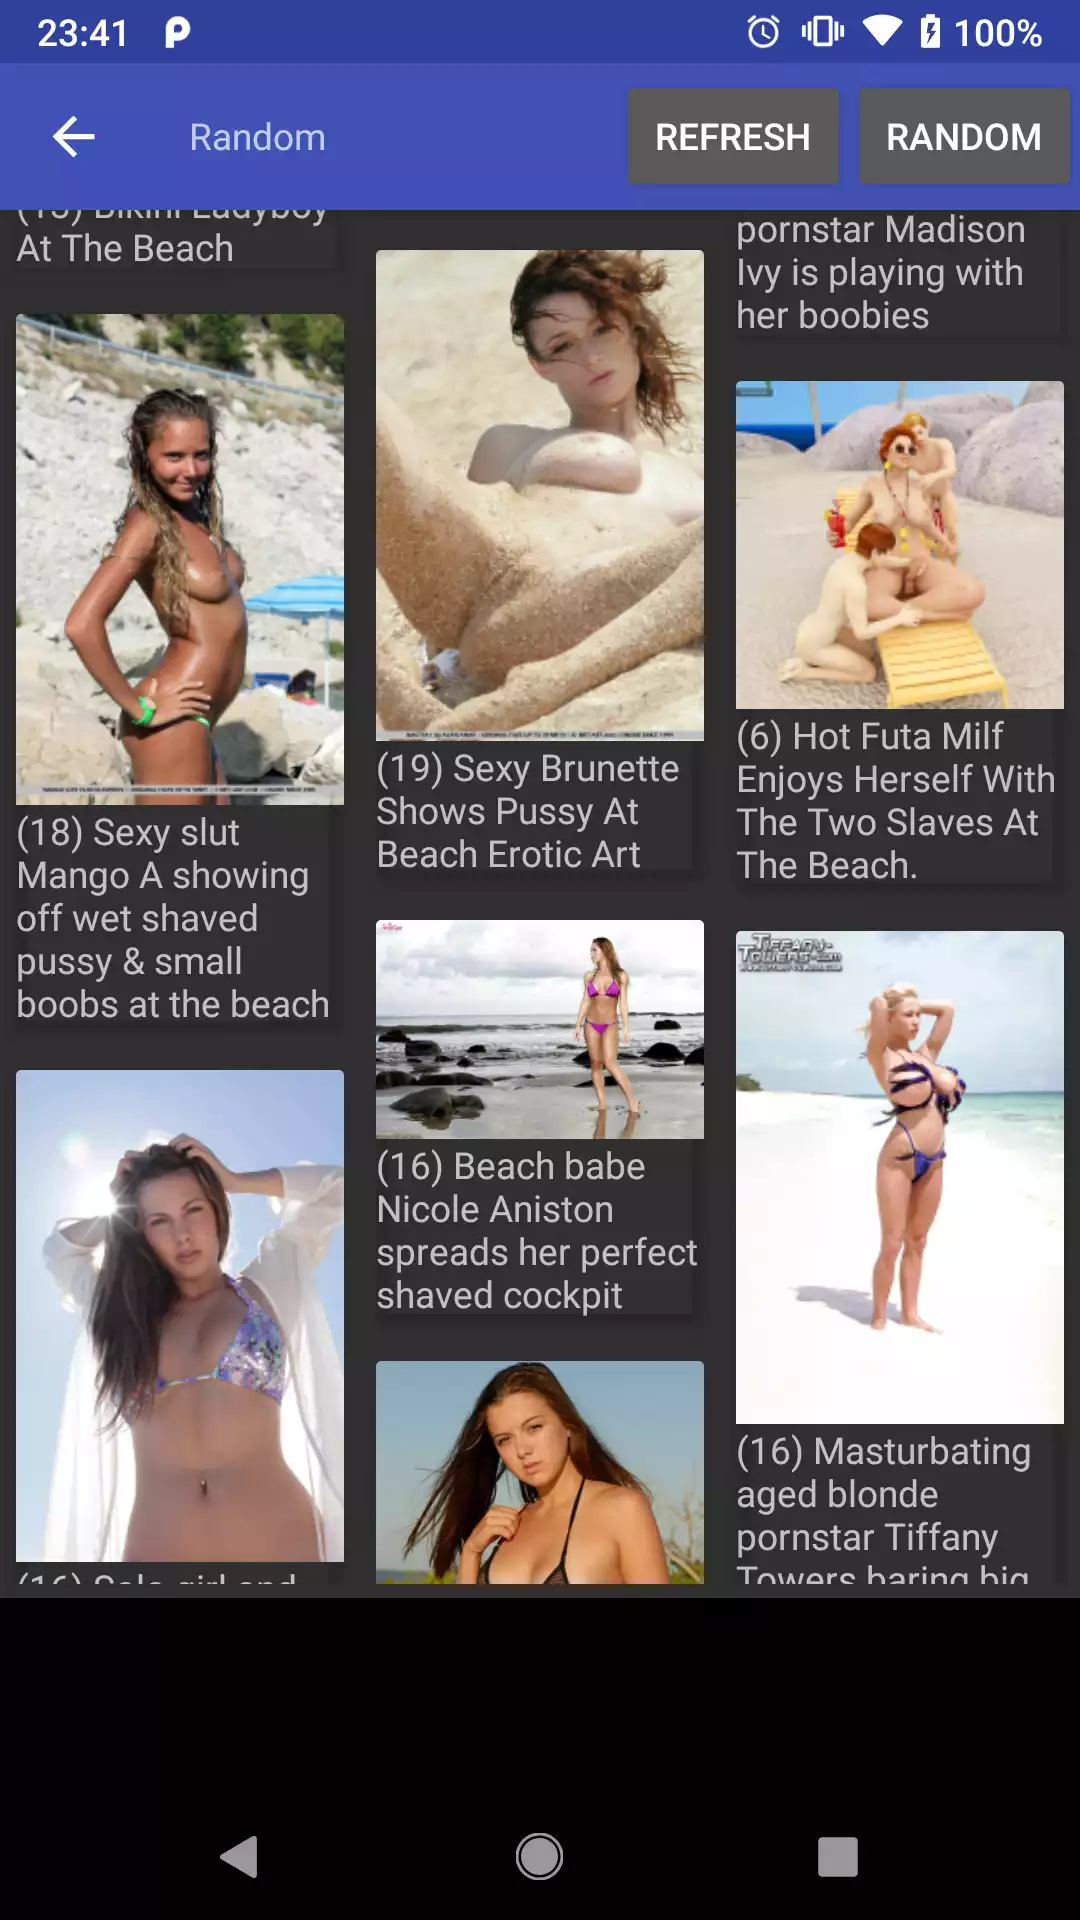 Beach Porn Galleries erotic,aplikasi,hentai,adult,phone,gallary,download,android,pornstarts,dreams,galleries,beach,picture,amateur,henti,apk,photo,nude,apps,shrinking,pics,porn,market,app,daily,wallpaper,sexy